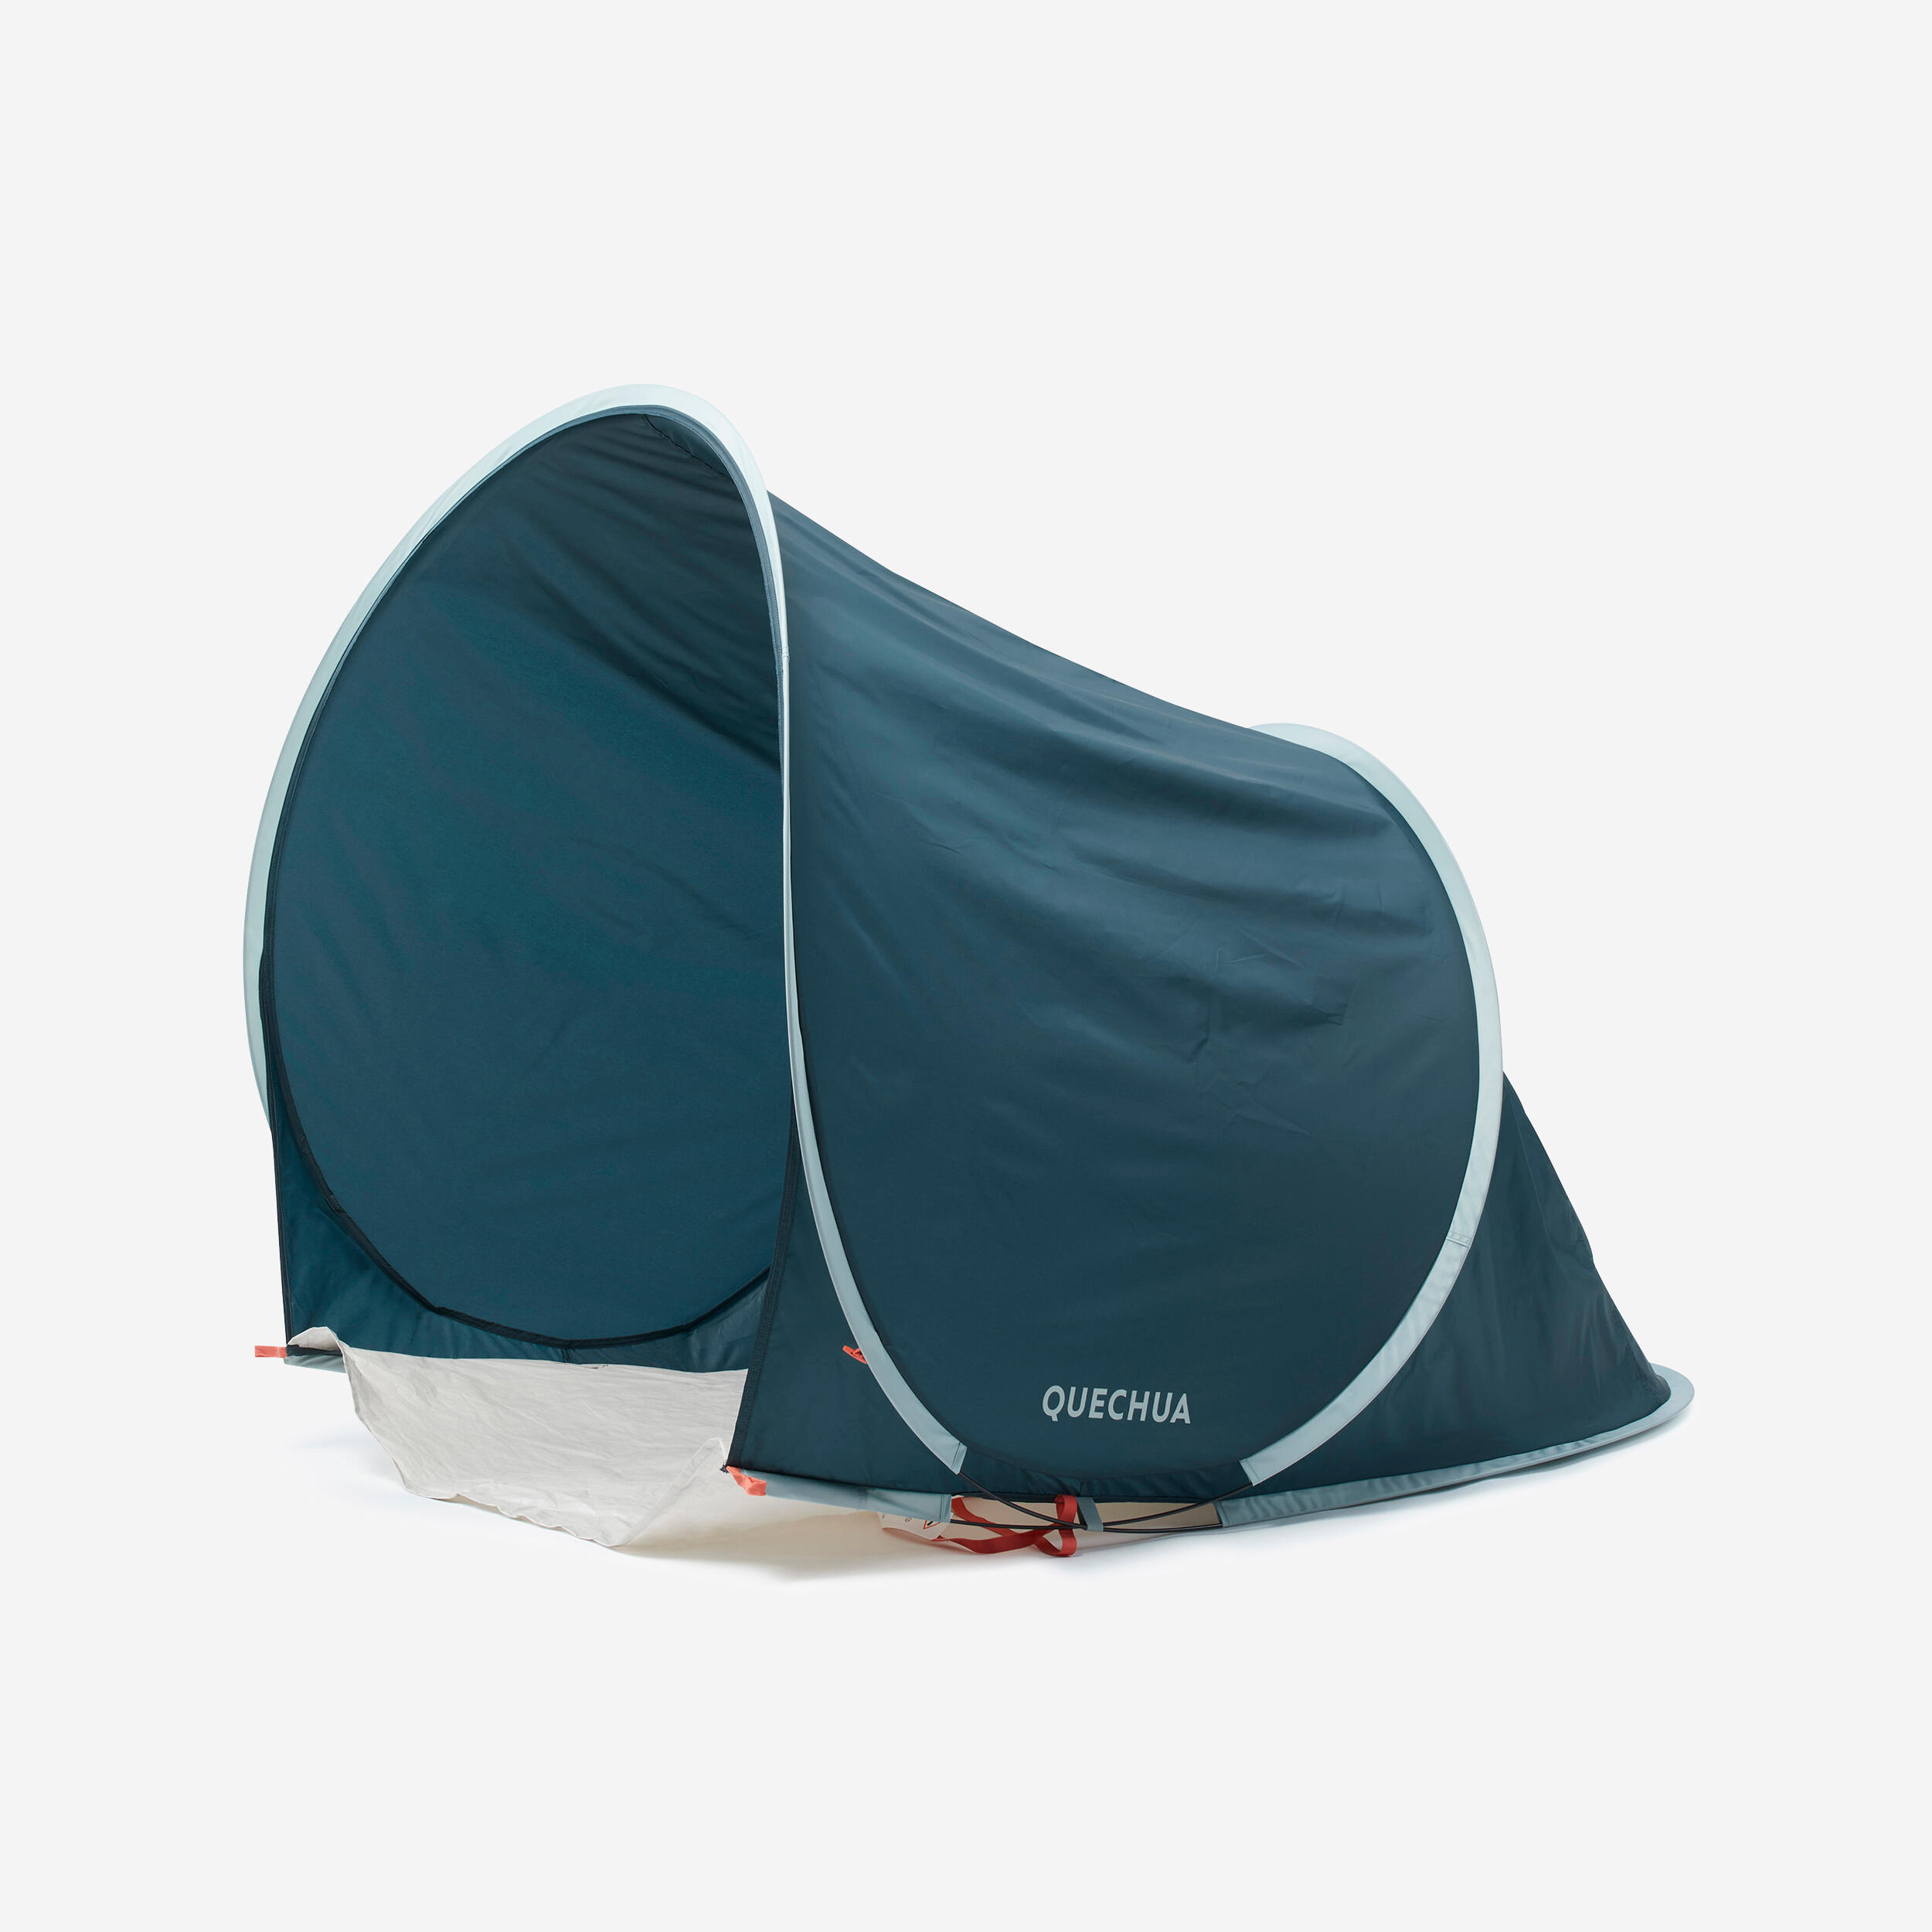 Quechua Instant Camping Shelter - 1 Adult Or 2 Kids Seconds 1p